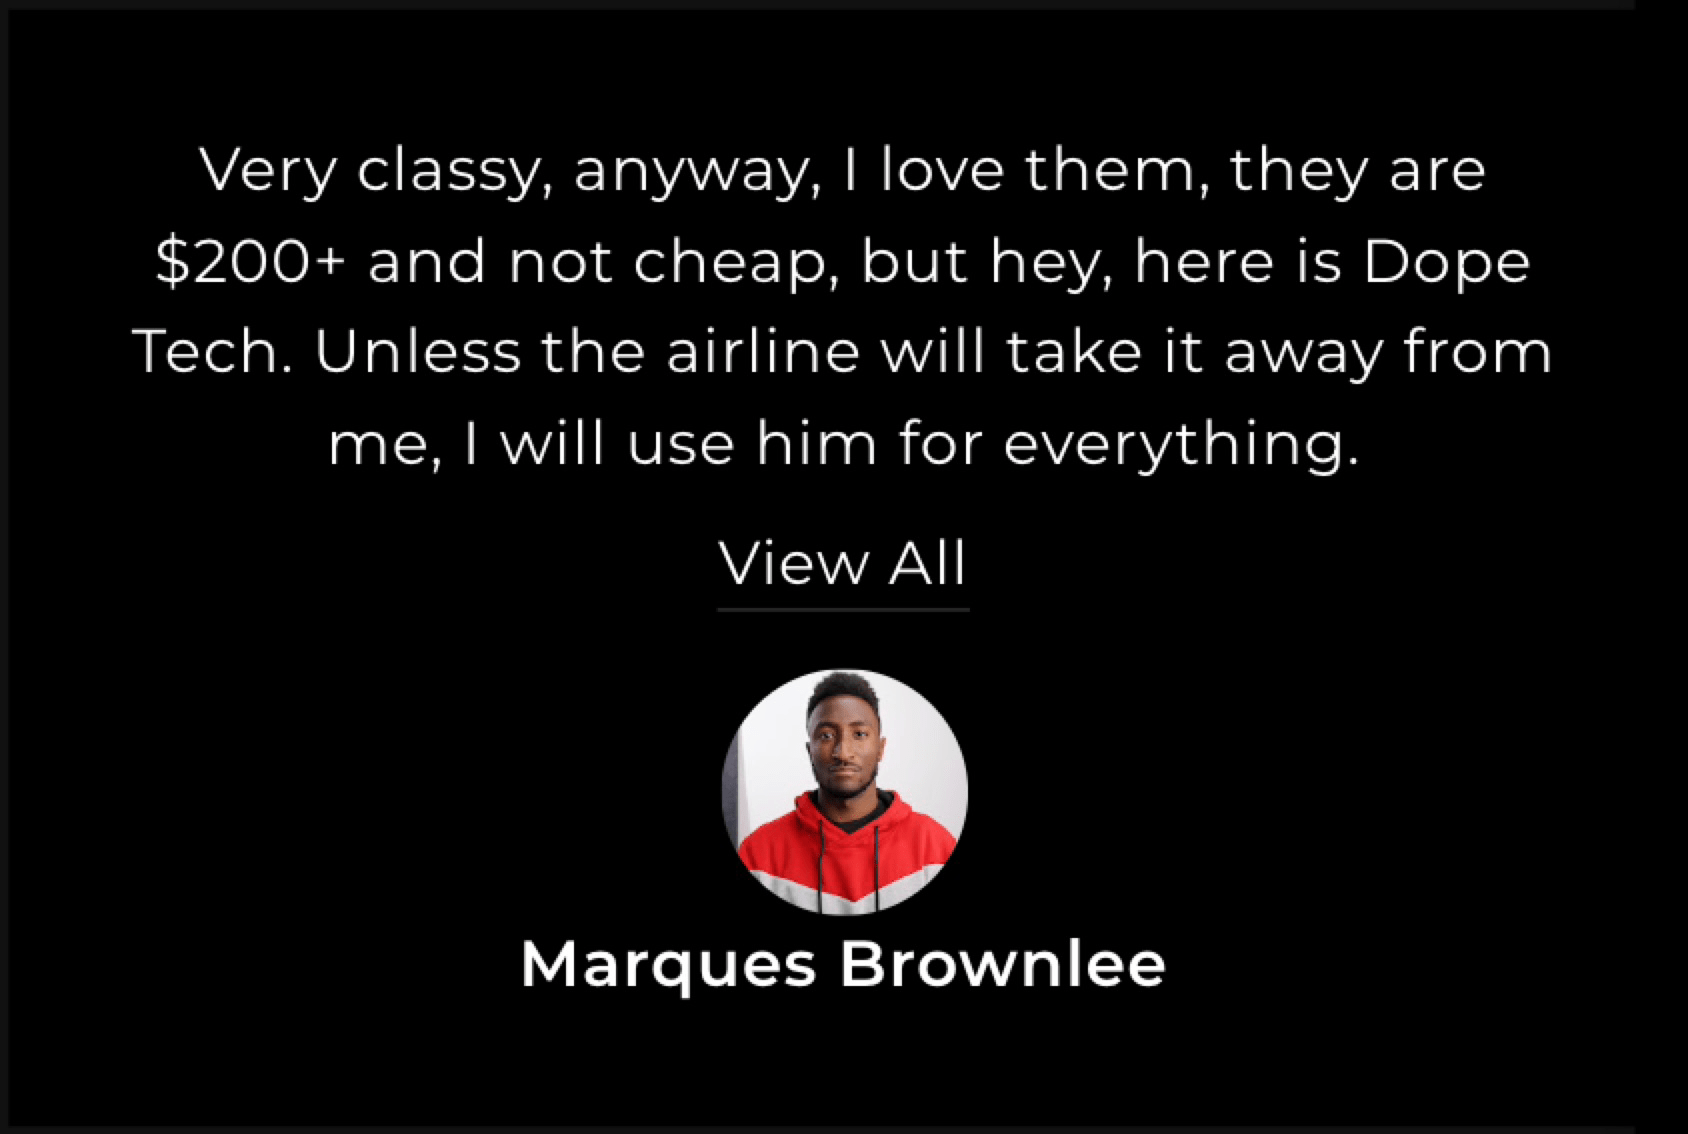 A screenshot from Shargeek's website of an excerpt from the Marques Brownlee paid promotion that says "Very classy, anyway, I love them, they are $200+ and not cheap, but hey, here is dope tech. Unless the airline will take it away from me, I will use him for everything."